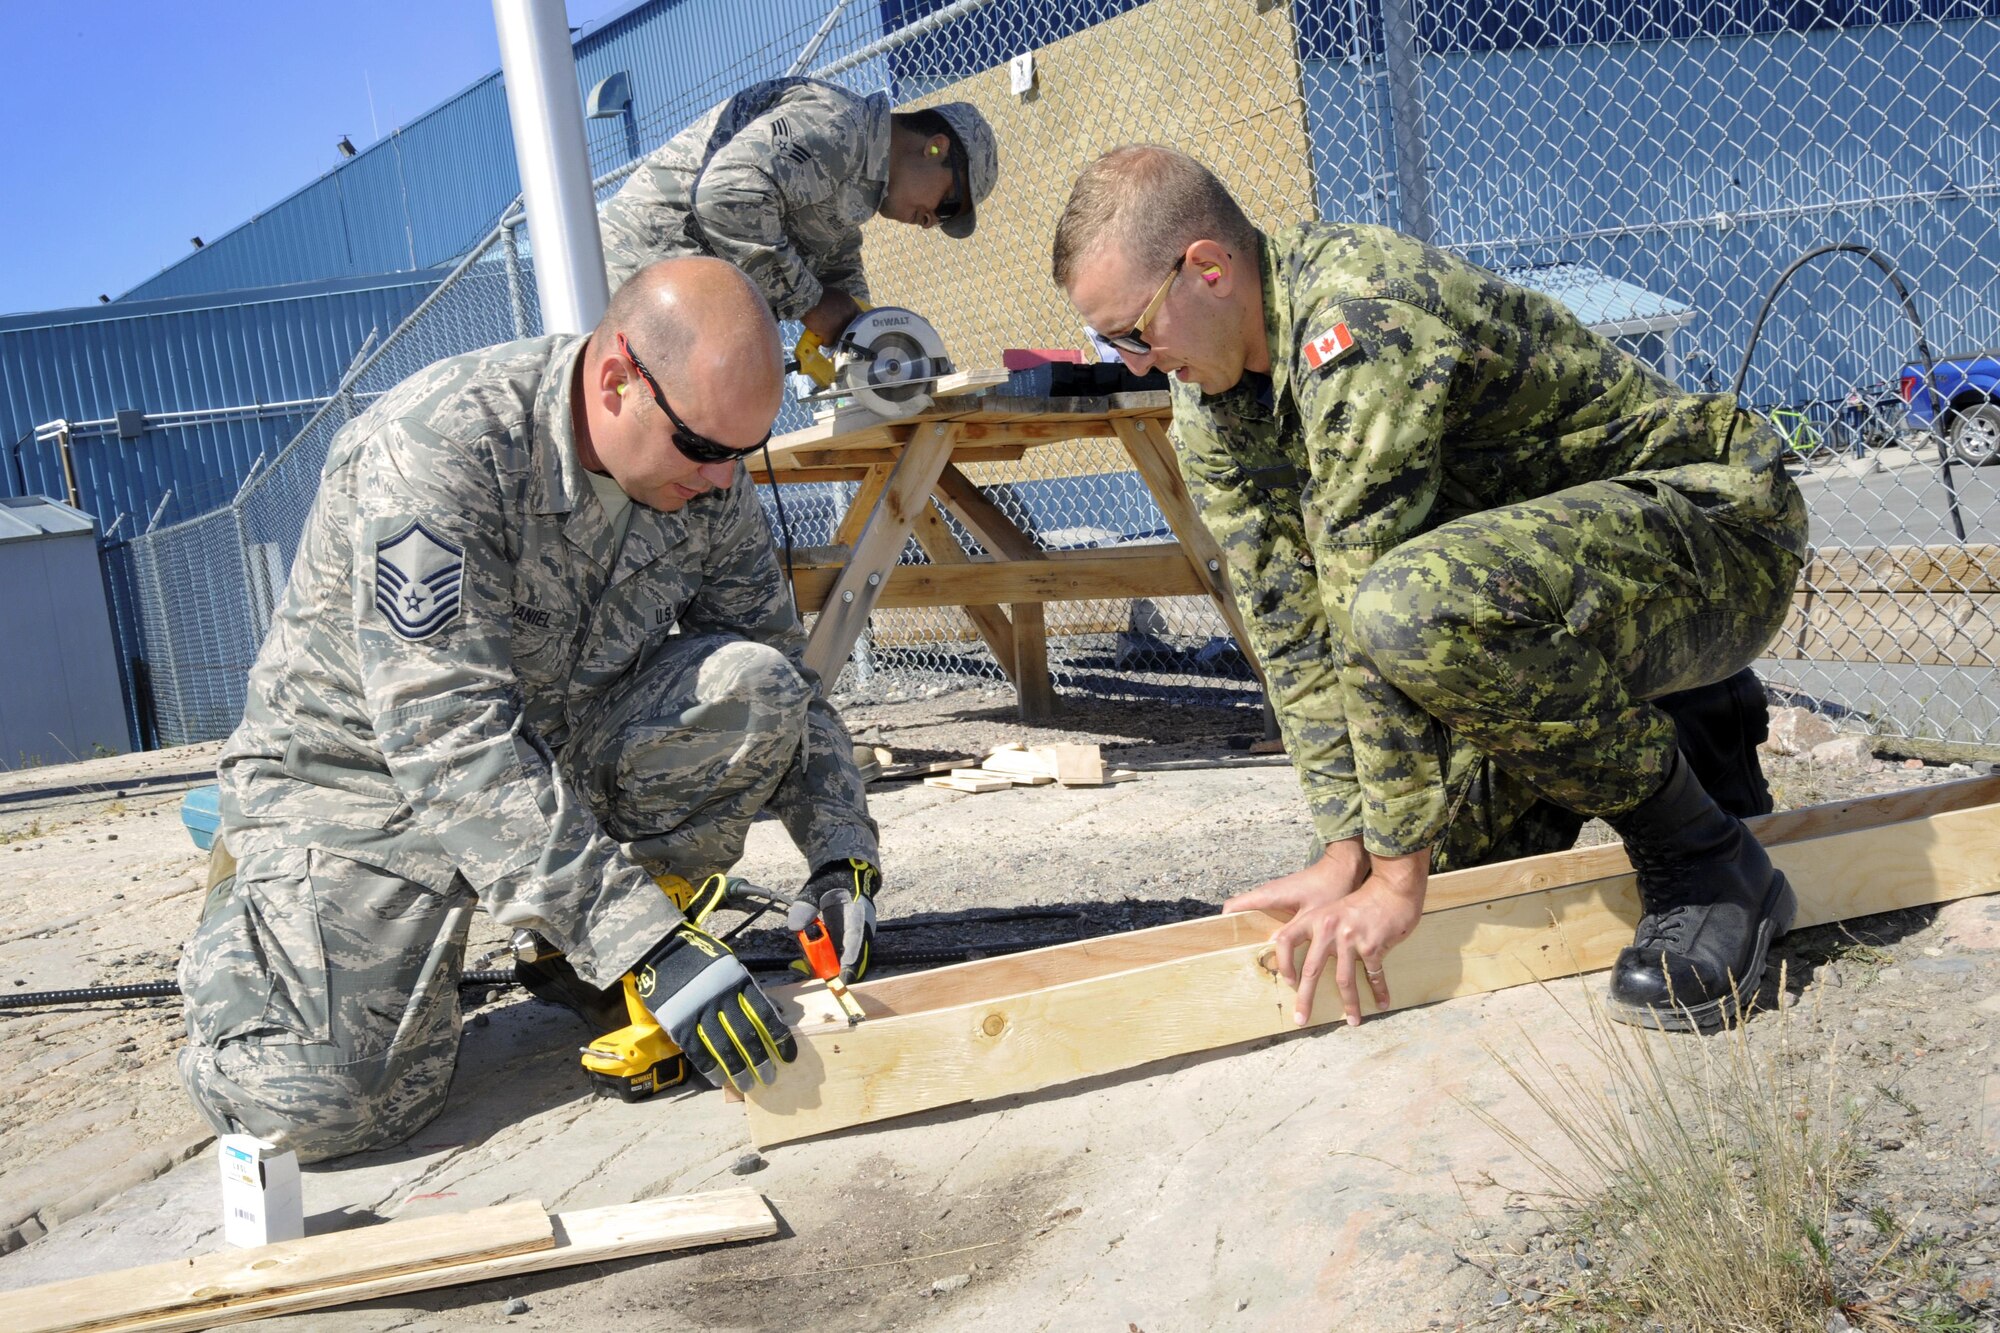 Oregon Air National Guard Master Sgt. Travis McDaniel, (left) assigned to the 142nd Fighter Wing Civil Engineer Squadron (CES) and Canadian Armed Forces Lt. Jordan Vadala (right) construct concrete form to install a new lighting project at the 440th Squadron/Escadrille, Yellowknife, Northwest Territories, Canada, July 19, 2017. (U.S. Air National Guard photo/Master Sgt. John Hughel, 142nd Fighter Wing Public Affairs)